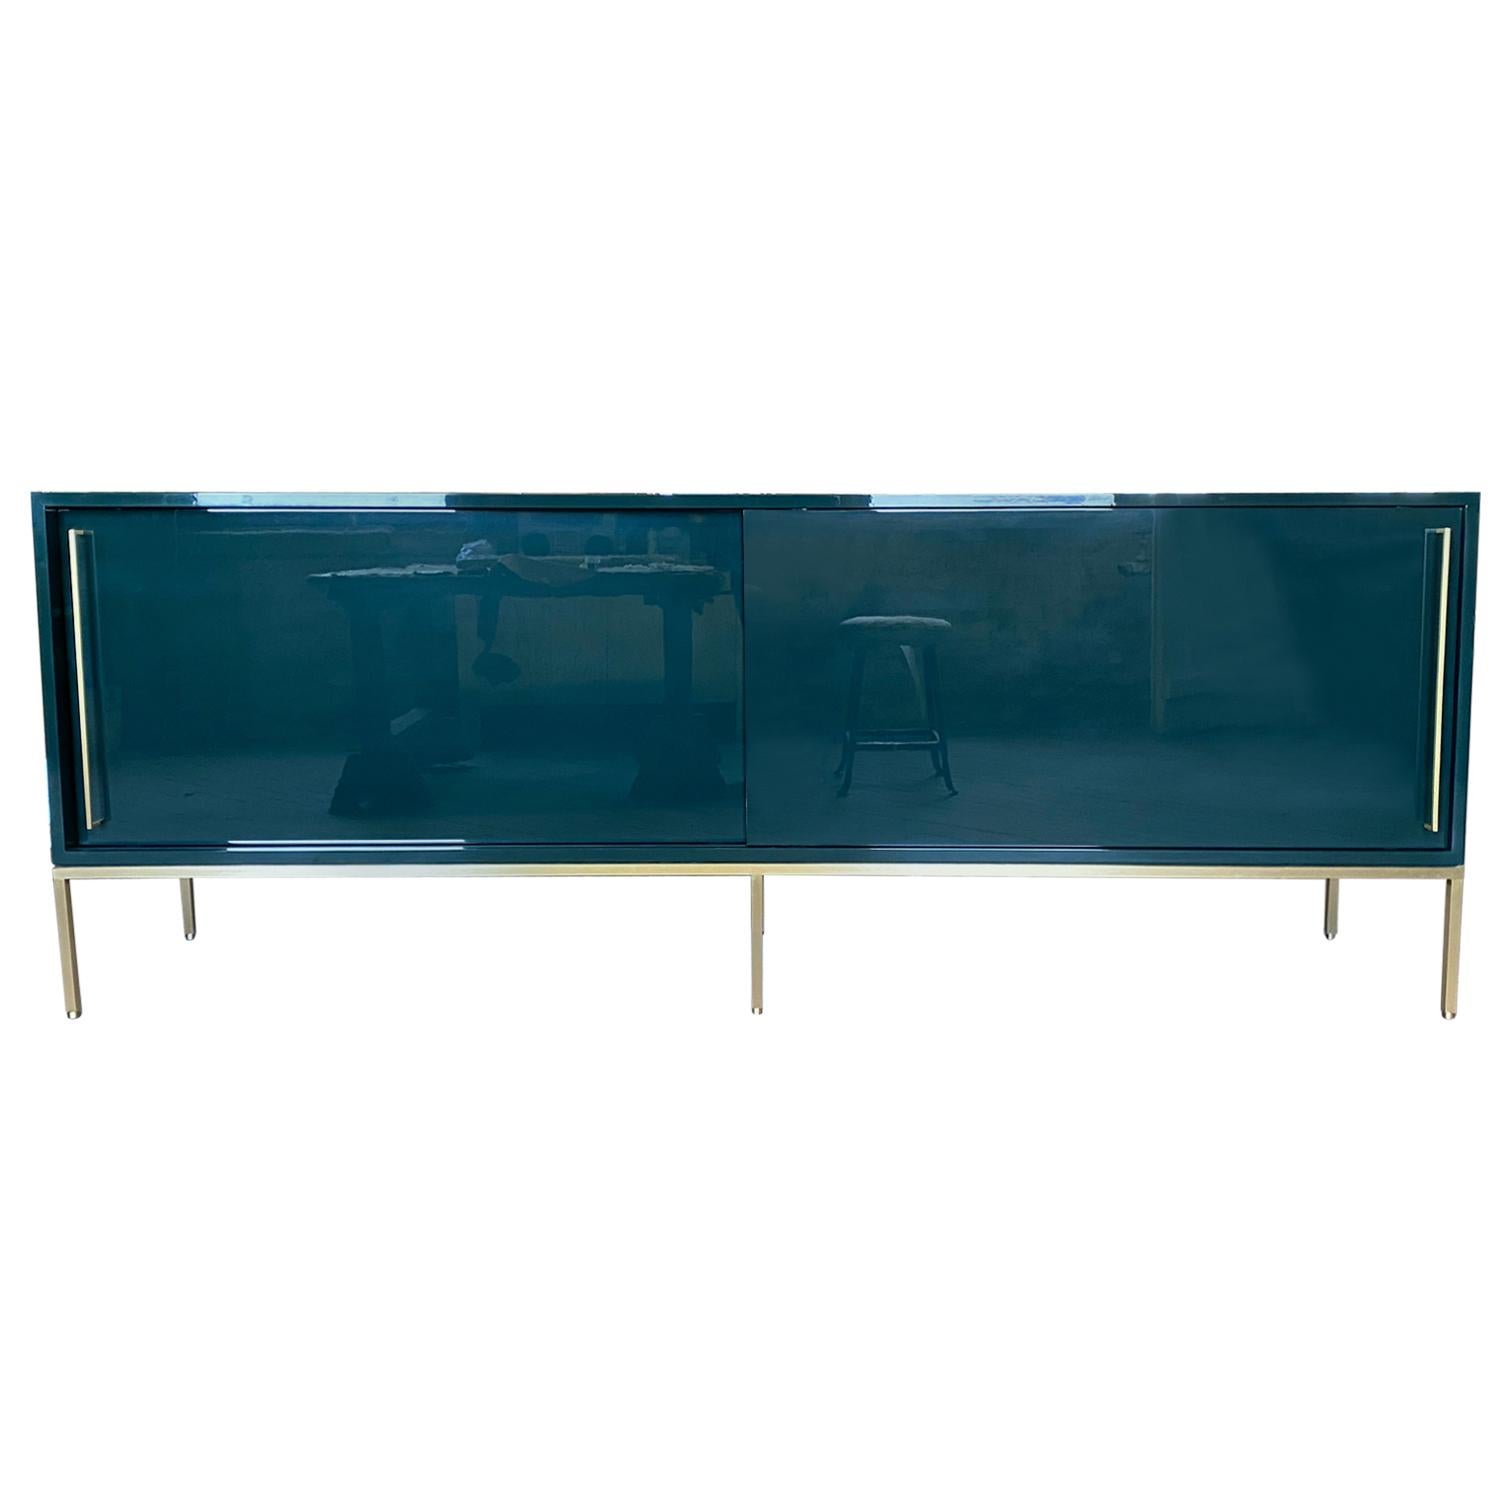 re: 379 Lacquered Credenza on Solid Brass Base